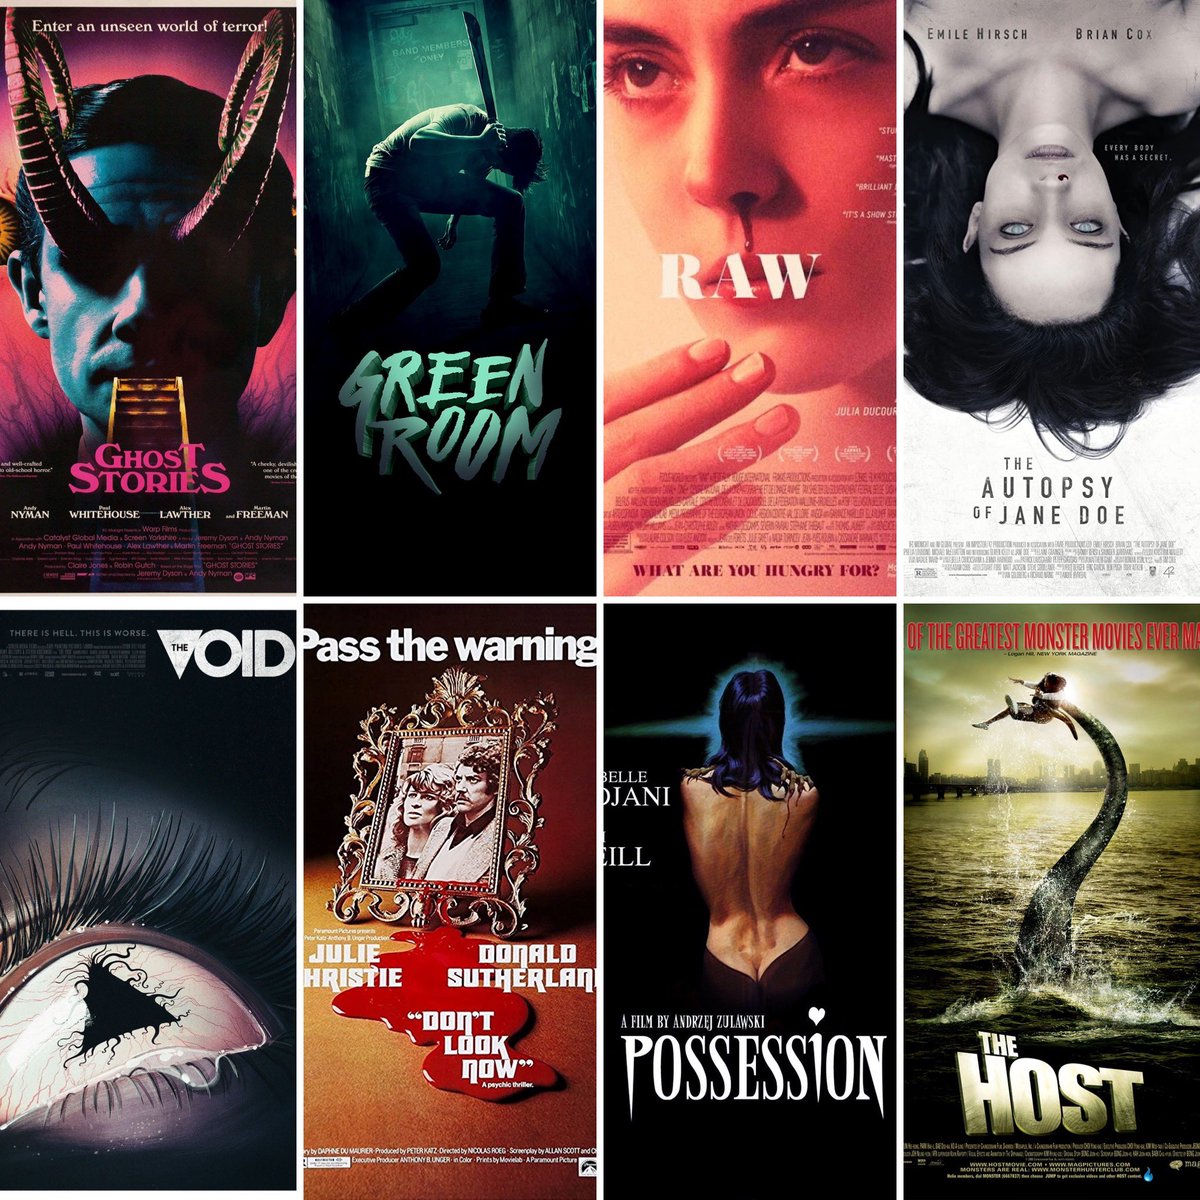 NOTE: This thread will cover all media barring traditional horror movies, there’s already plethoras of lists dissecting those, so I wanna look at some of the less talked about horror mediums, though if you need movie recommendations, here are a few that I’ve enjoyed recently